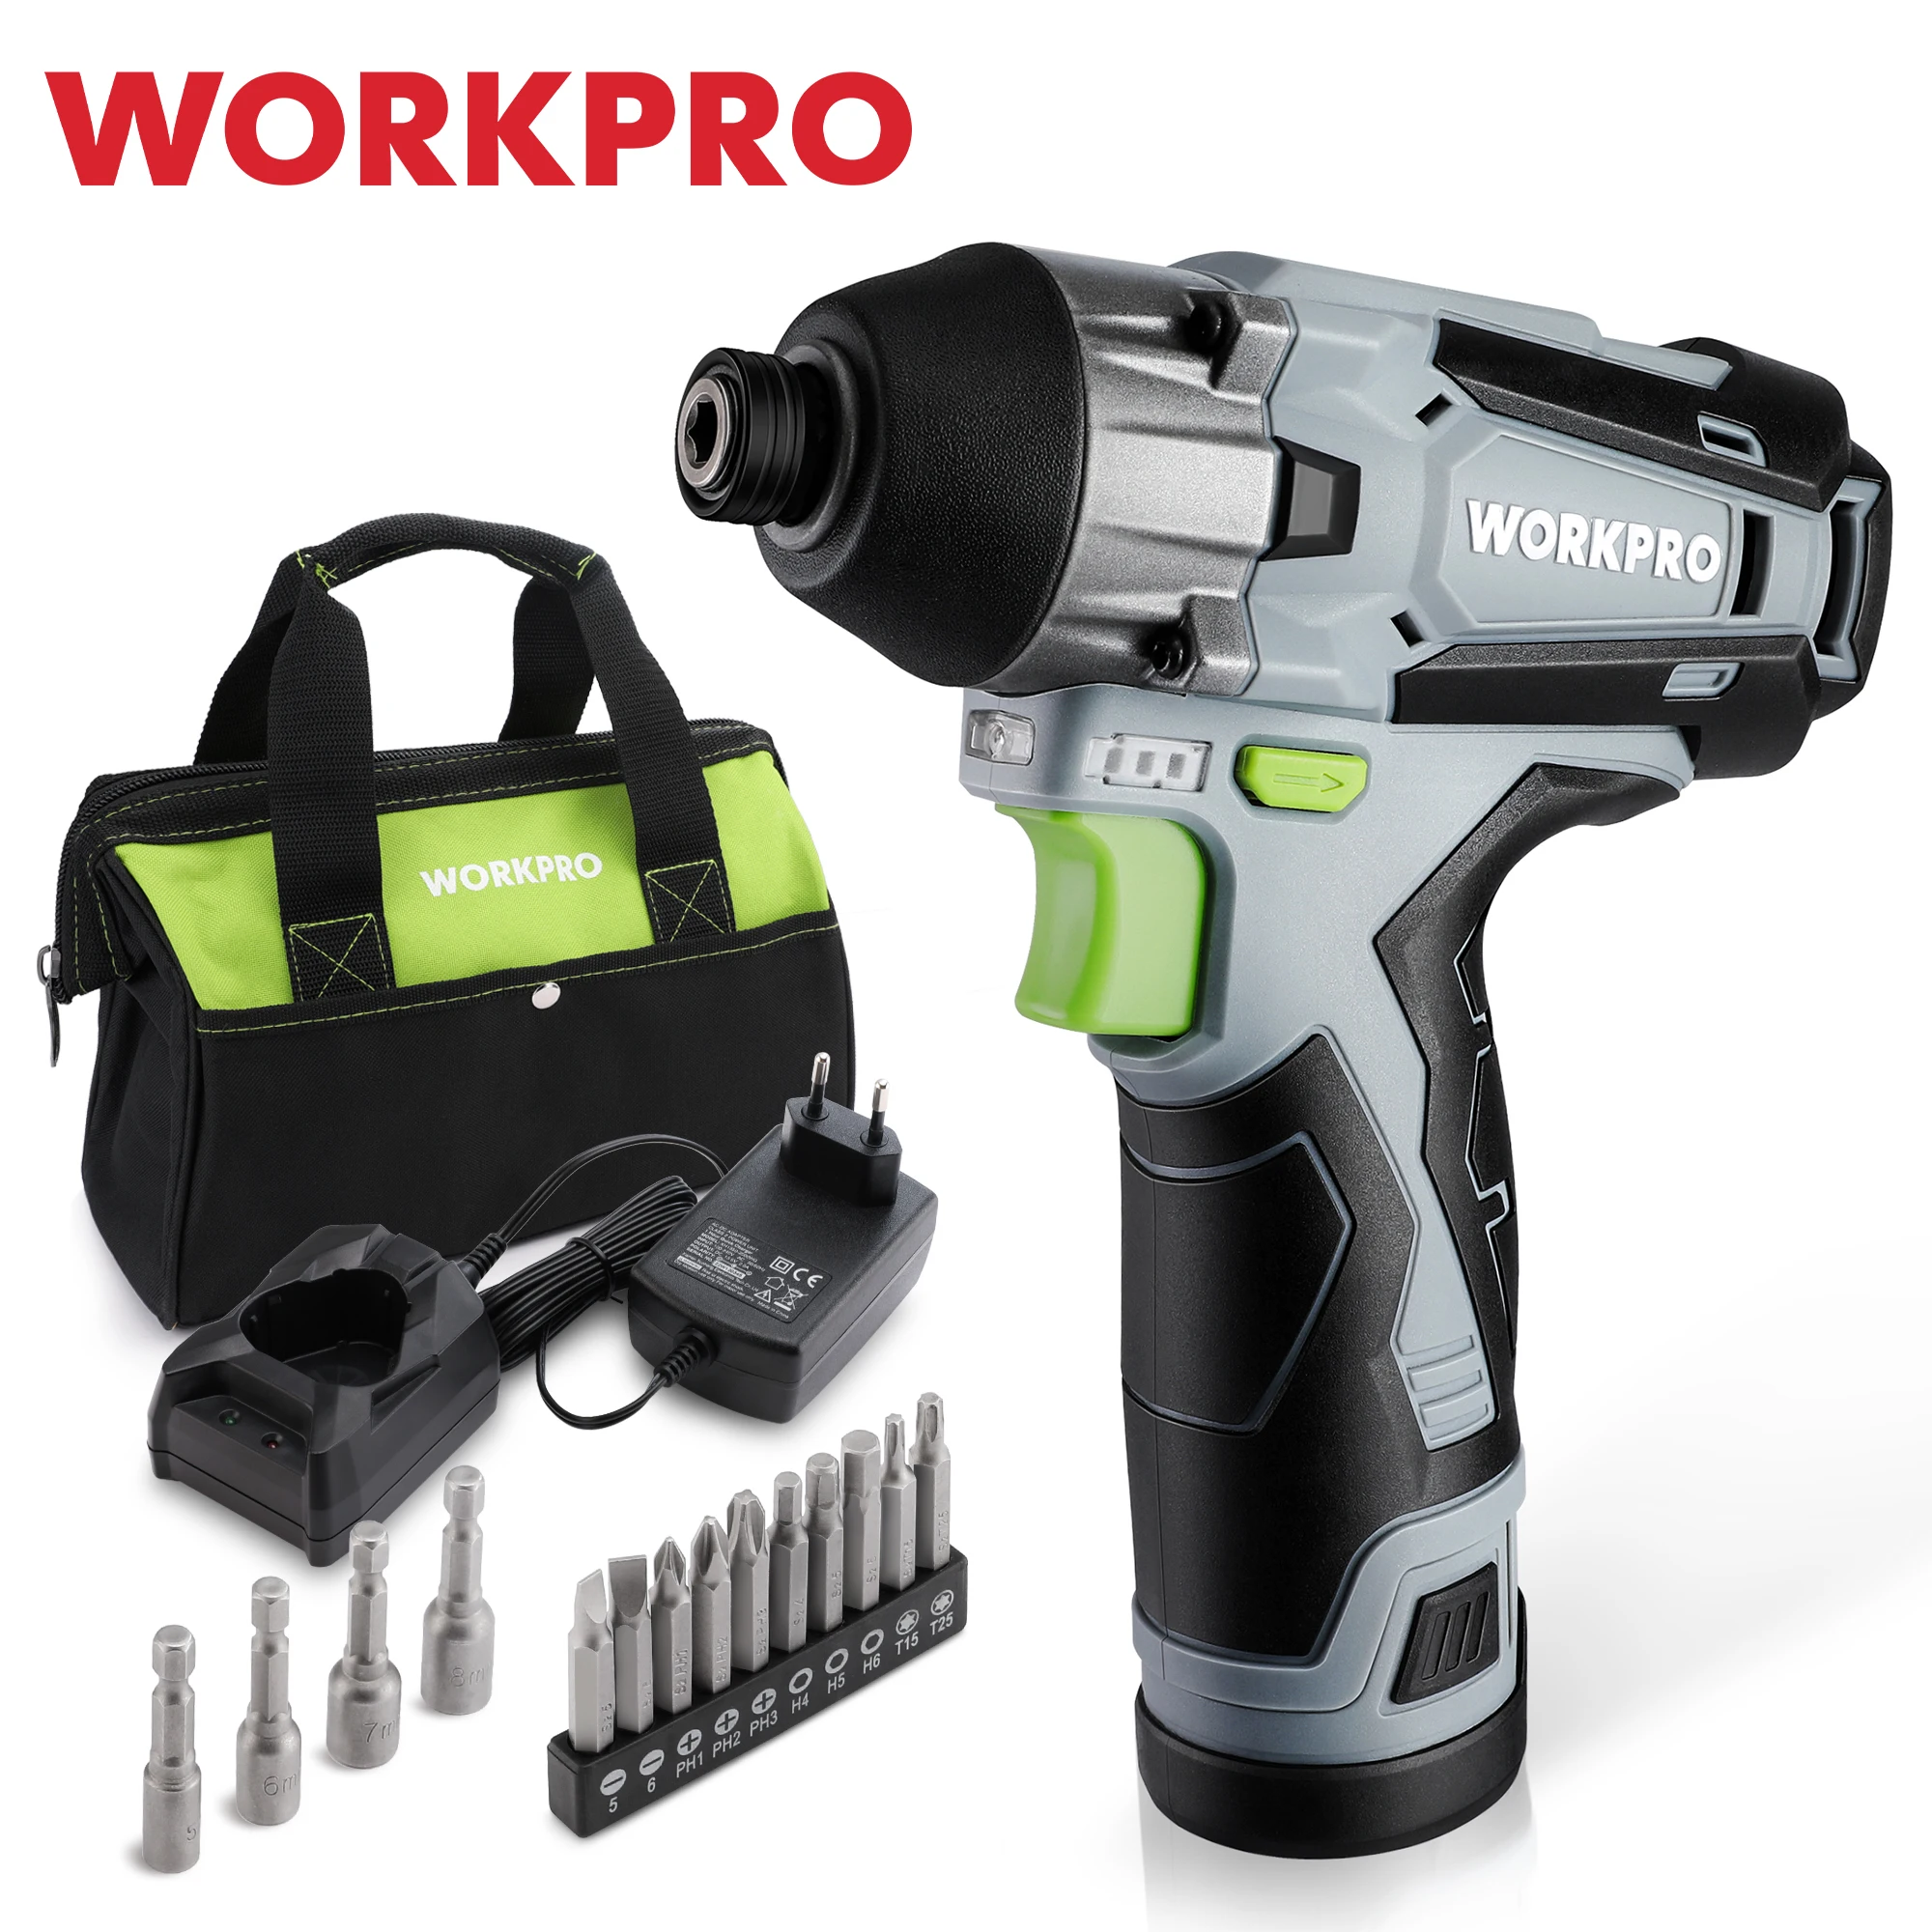 WORKPRO 12V Cordless Impact Driver Kit 1/4” Hex Electric Impact Drill/Driver Set 100NM Torque Electric Screwdriver fast charging